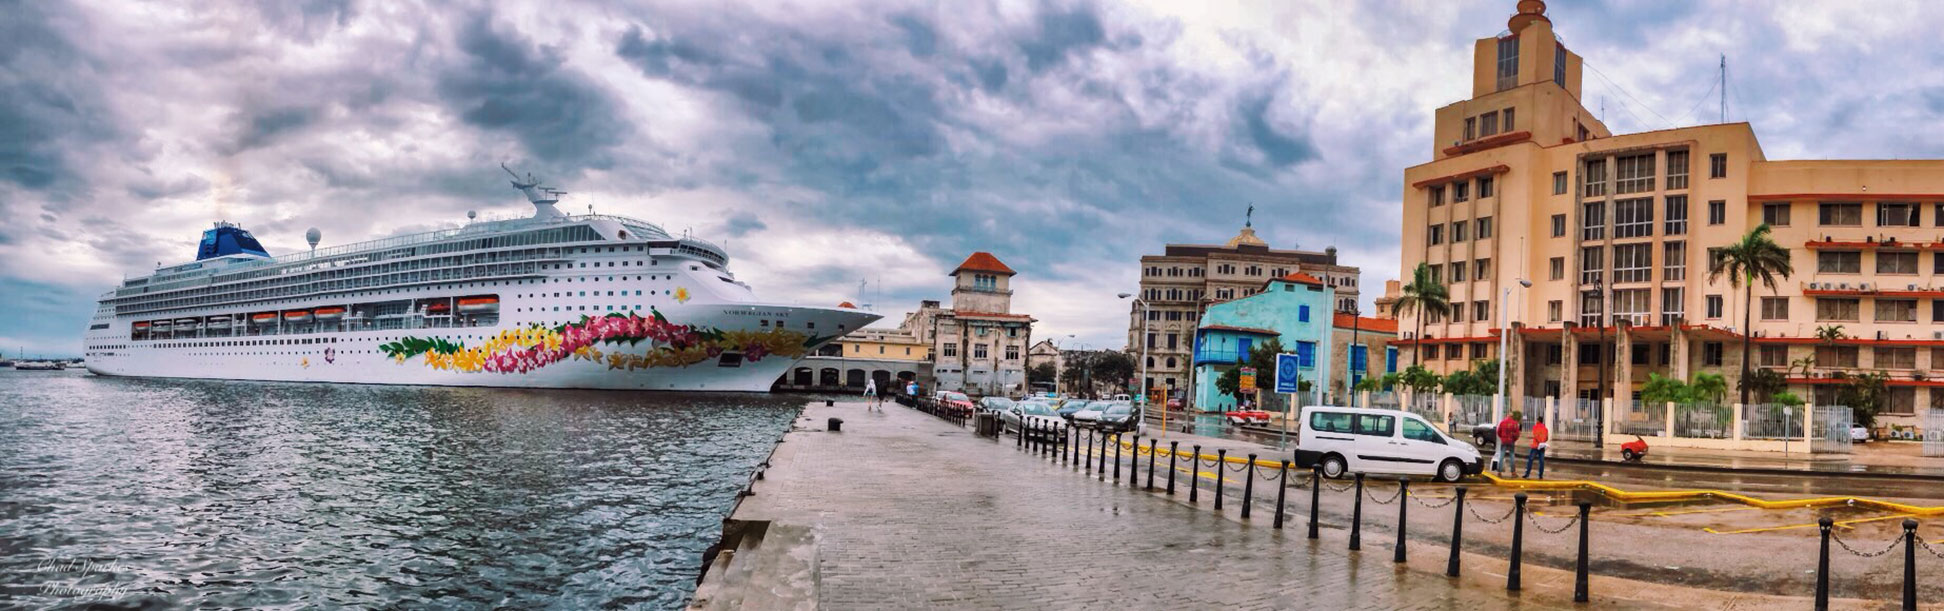 A Norwegian Sky cruise ship docked at the Sierra Maestra Terminal in the Port of Havana.